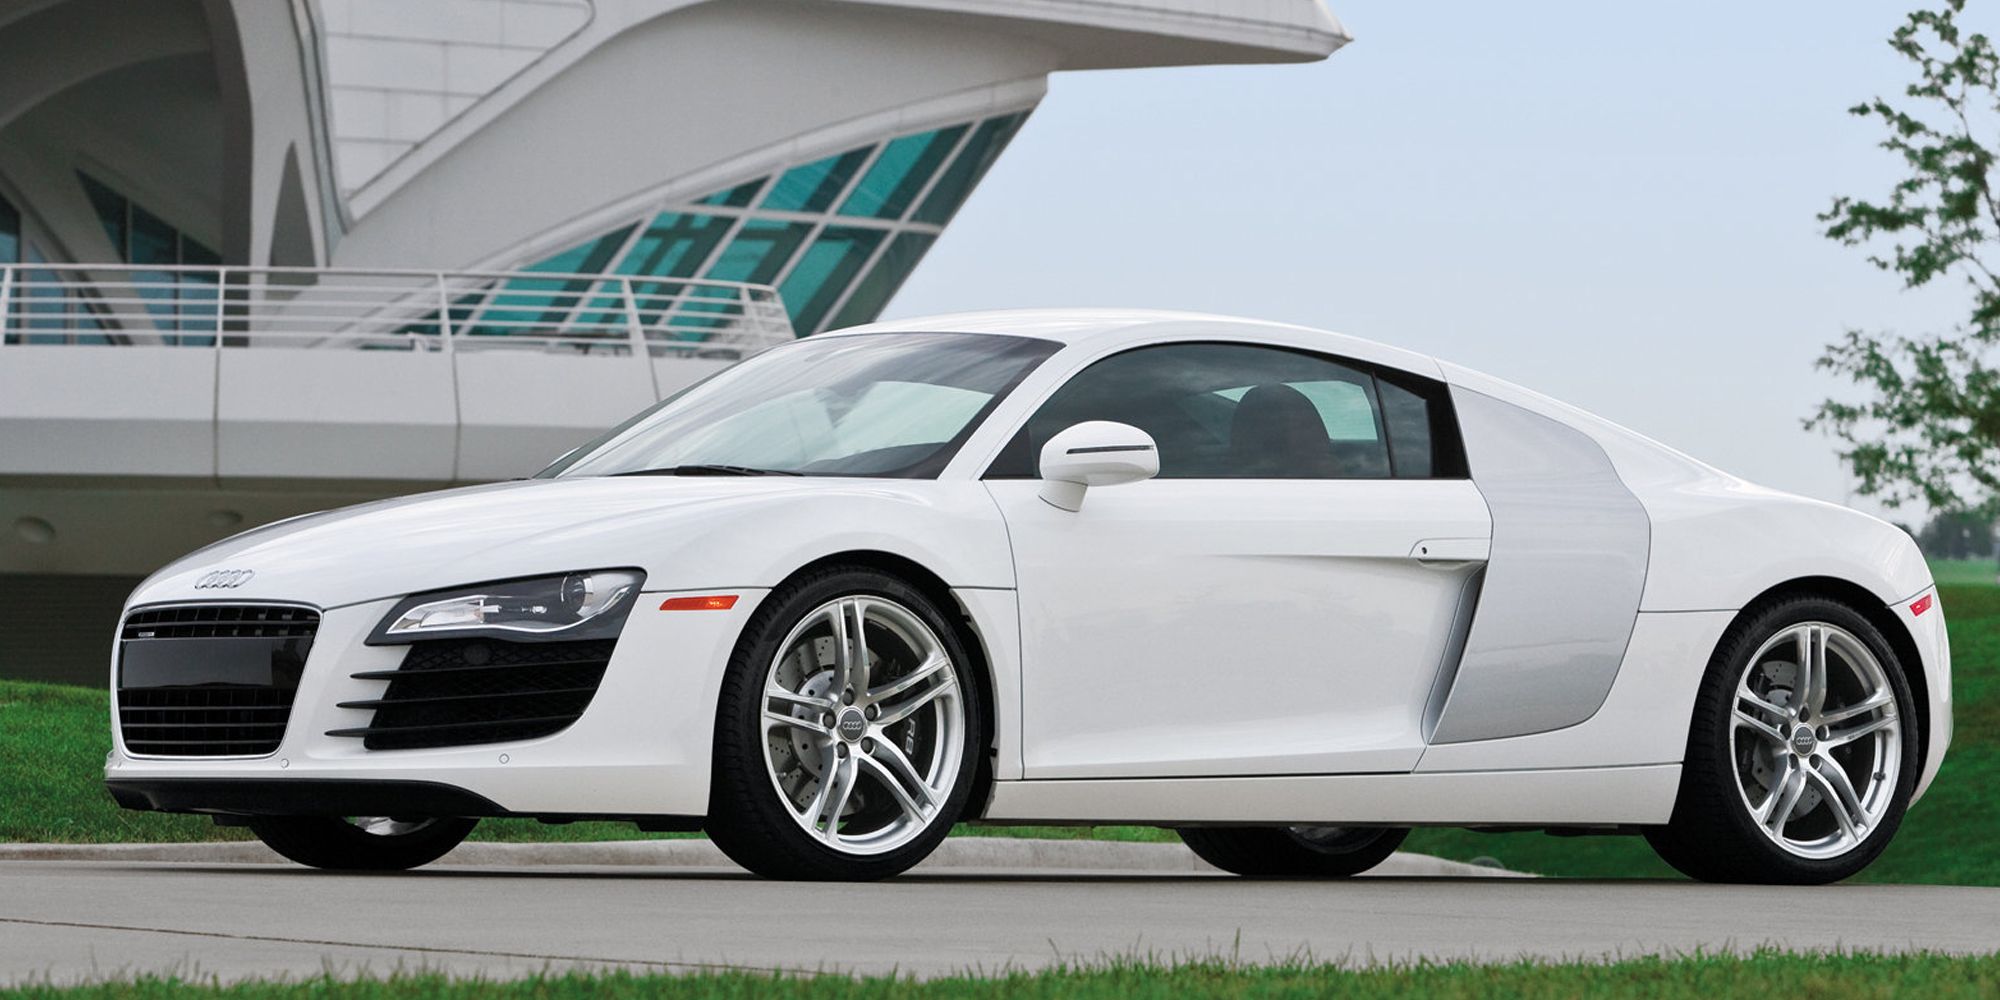 Front 3/4 view of the original R8